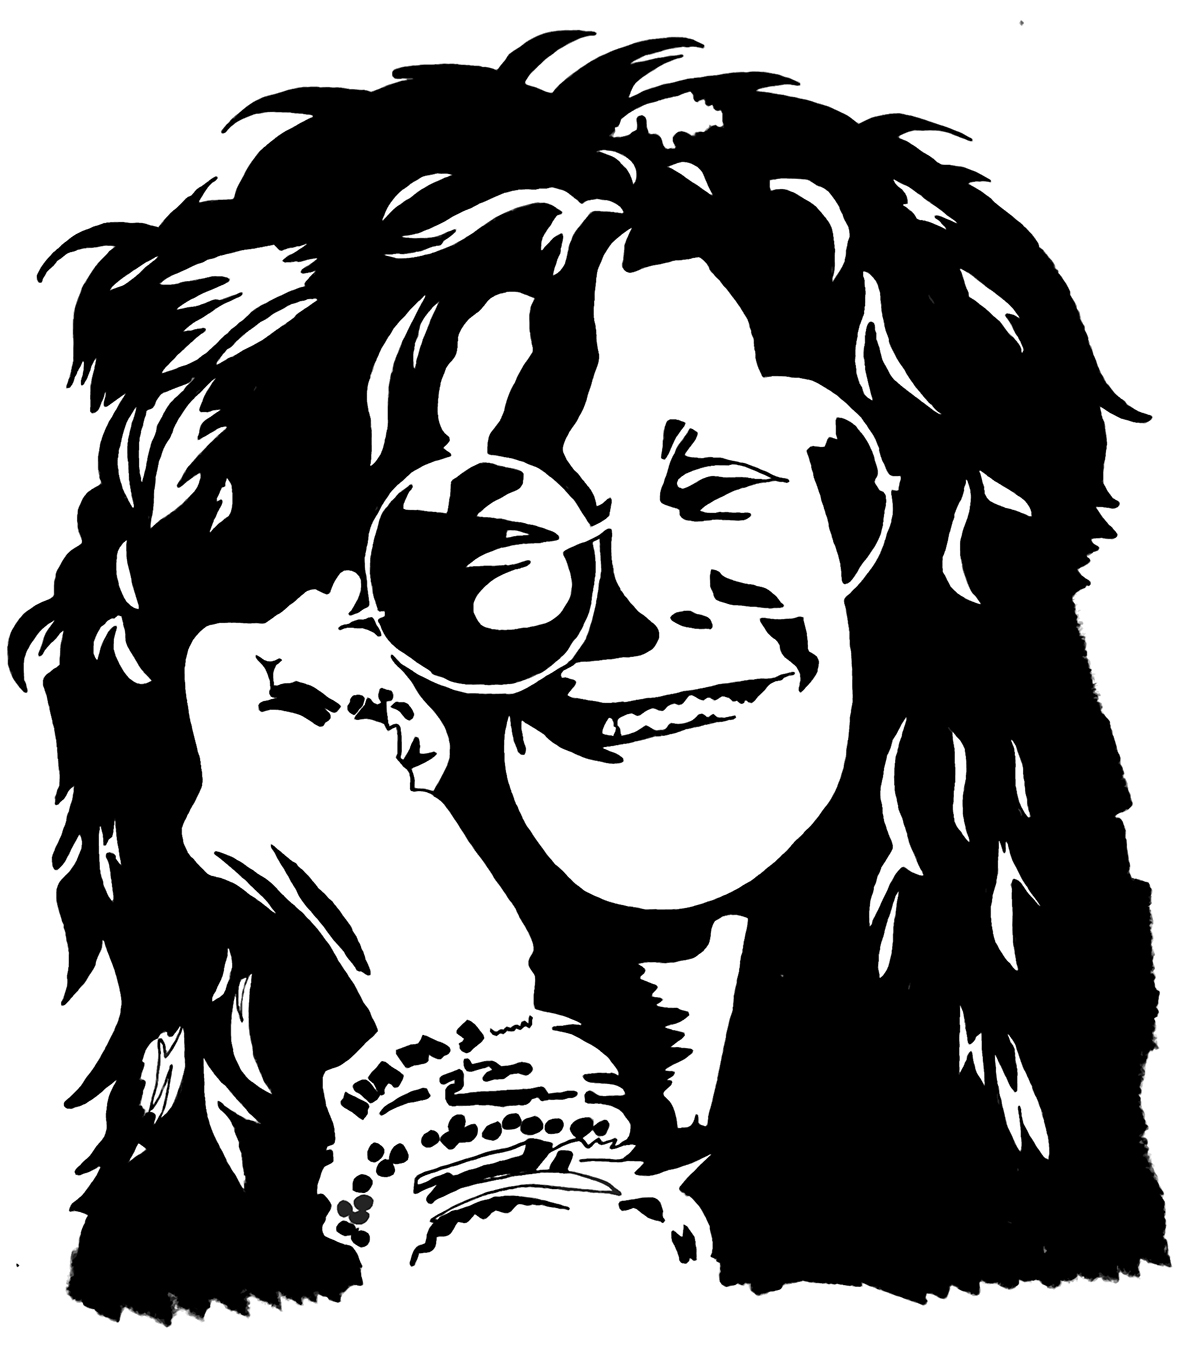 sixties music legend pen and ink graphic